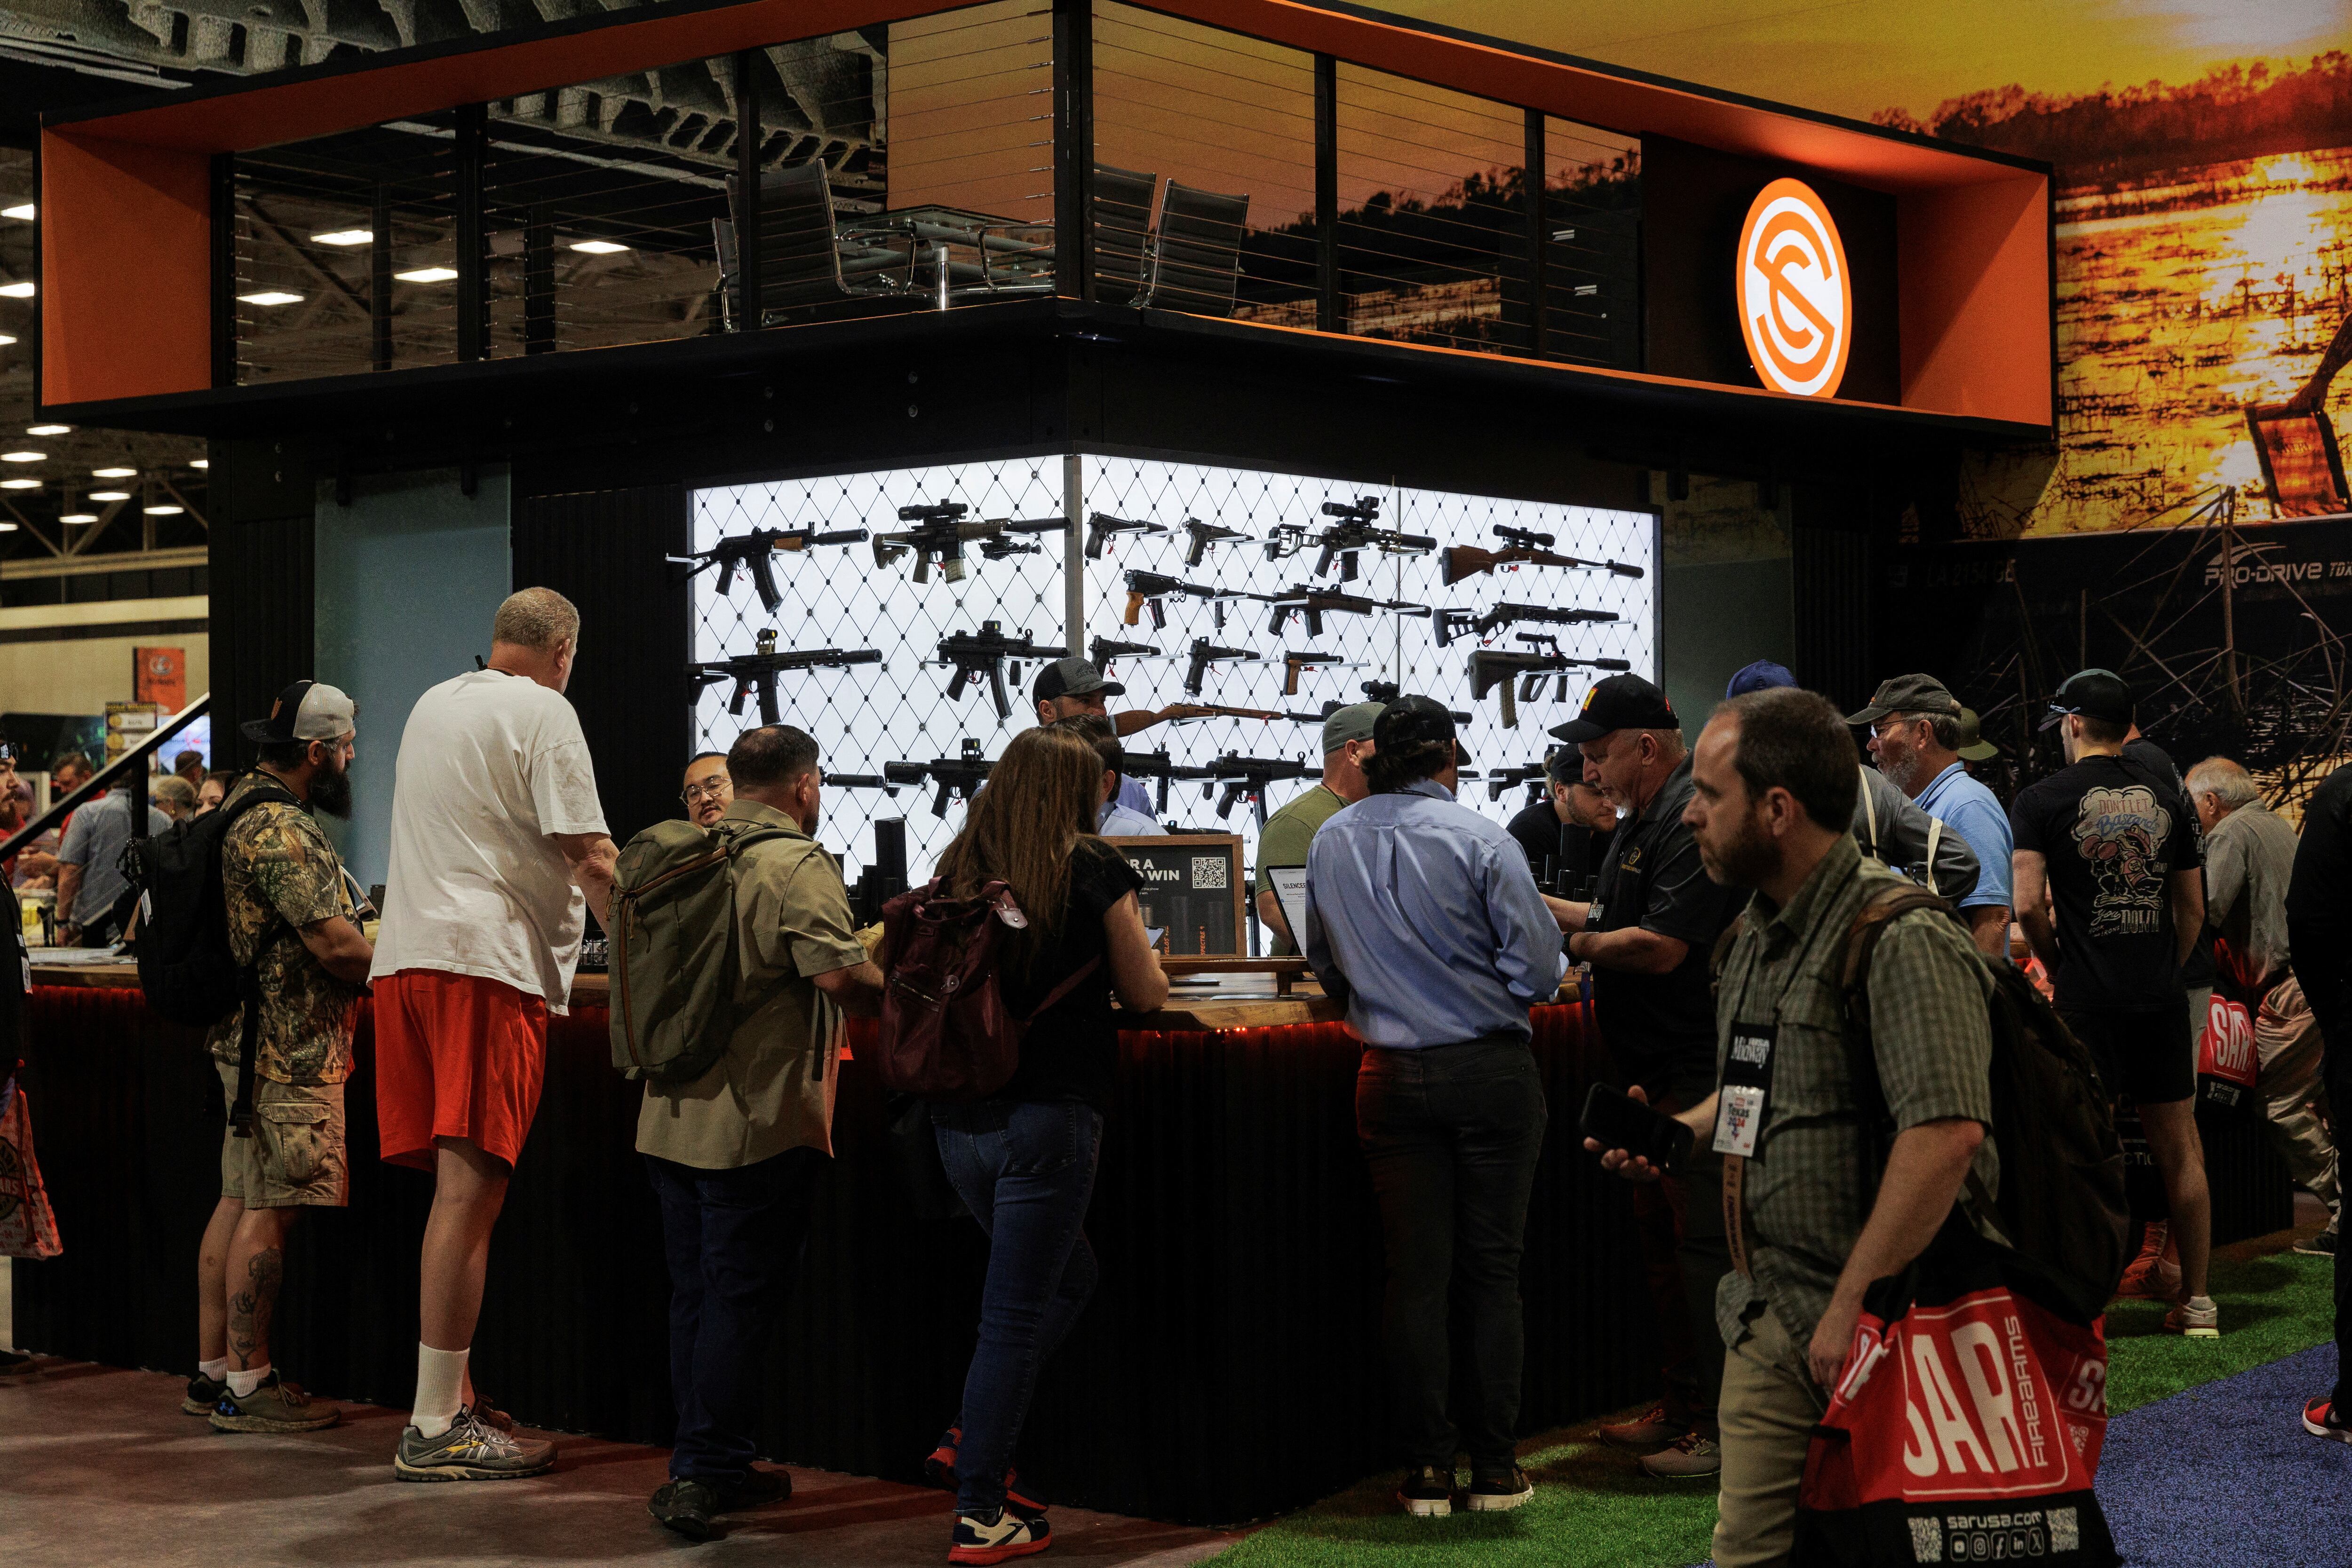 Customers at the annual National Rifle Association (NRA) expo in Dallas on May 17.